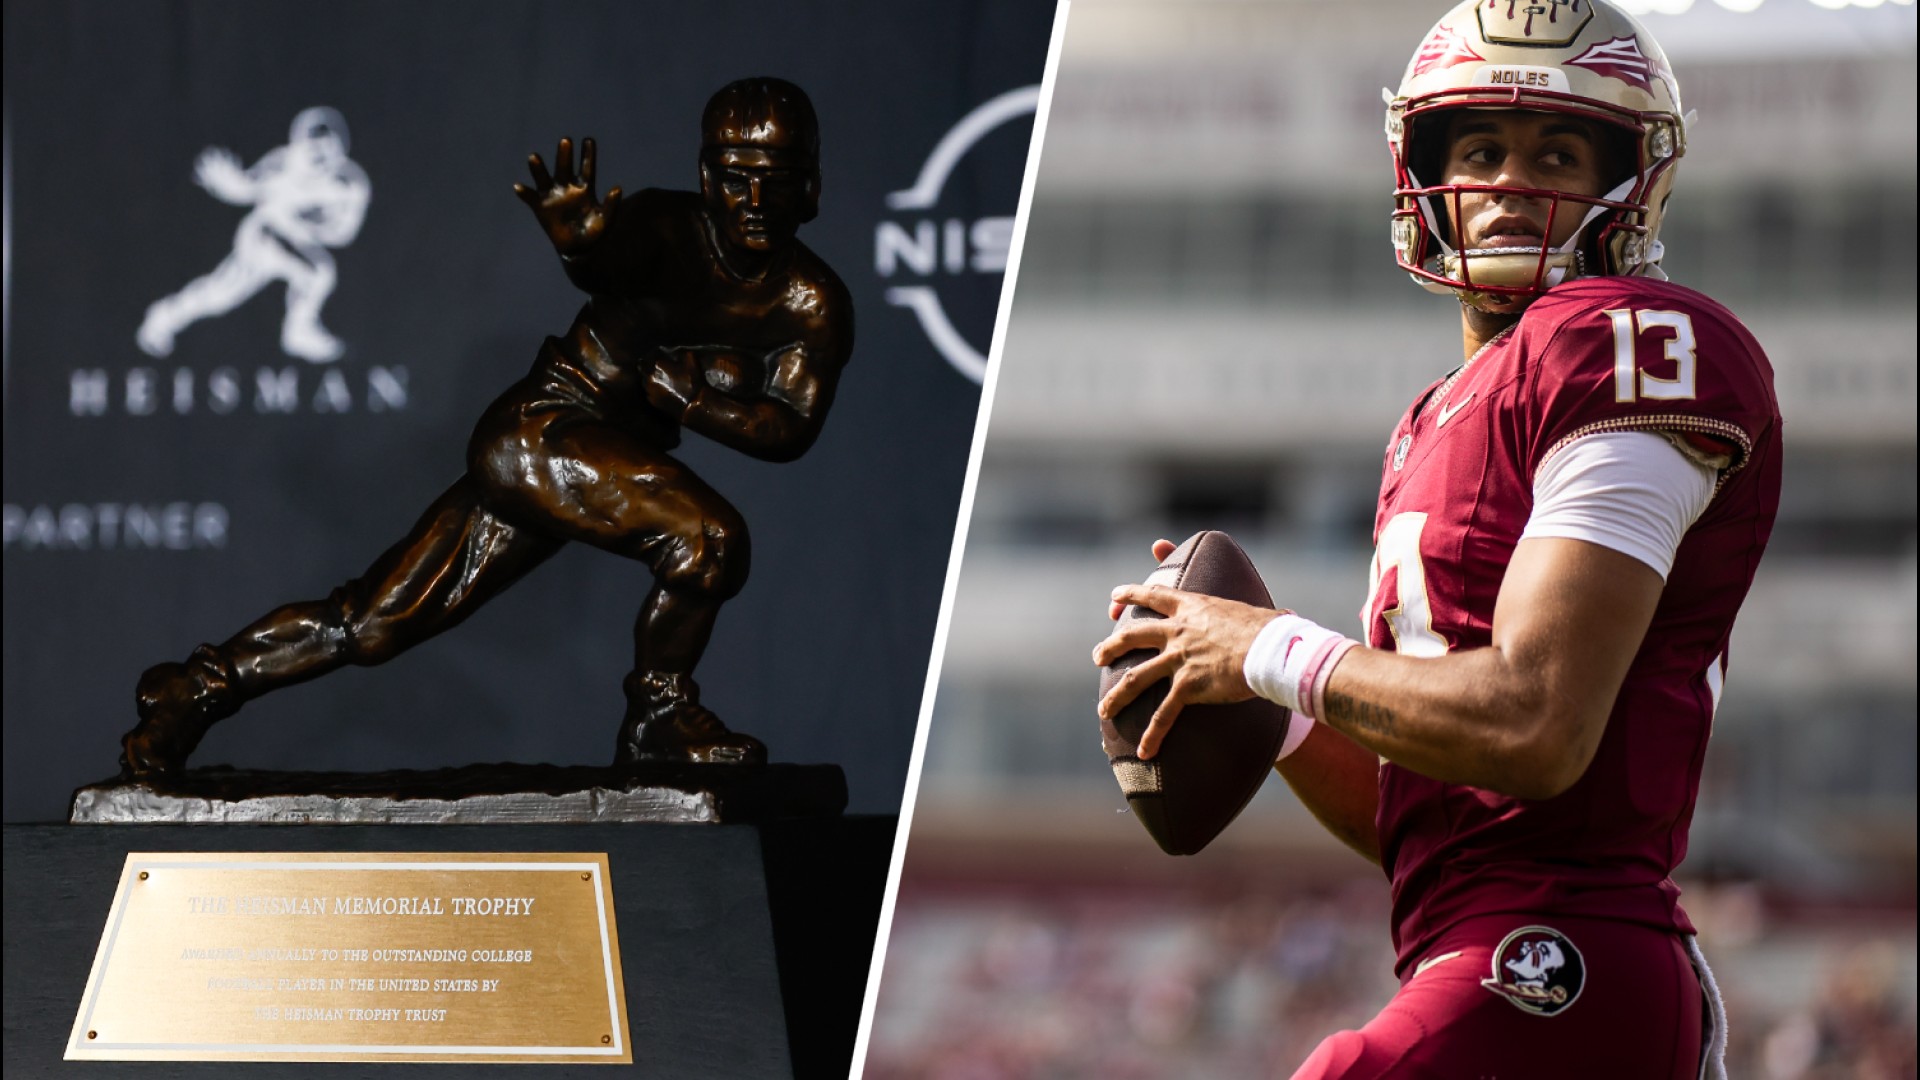 Recent Heisman winners who were NFL disappointments